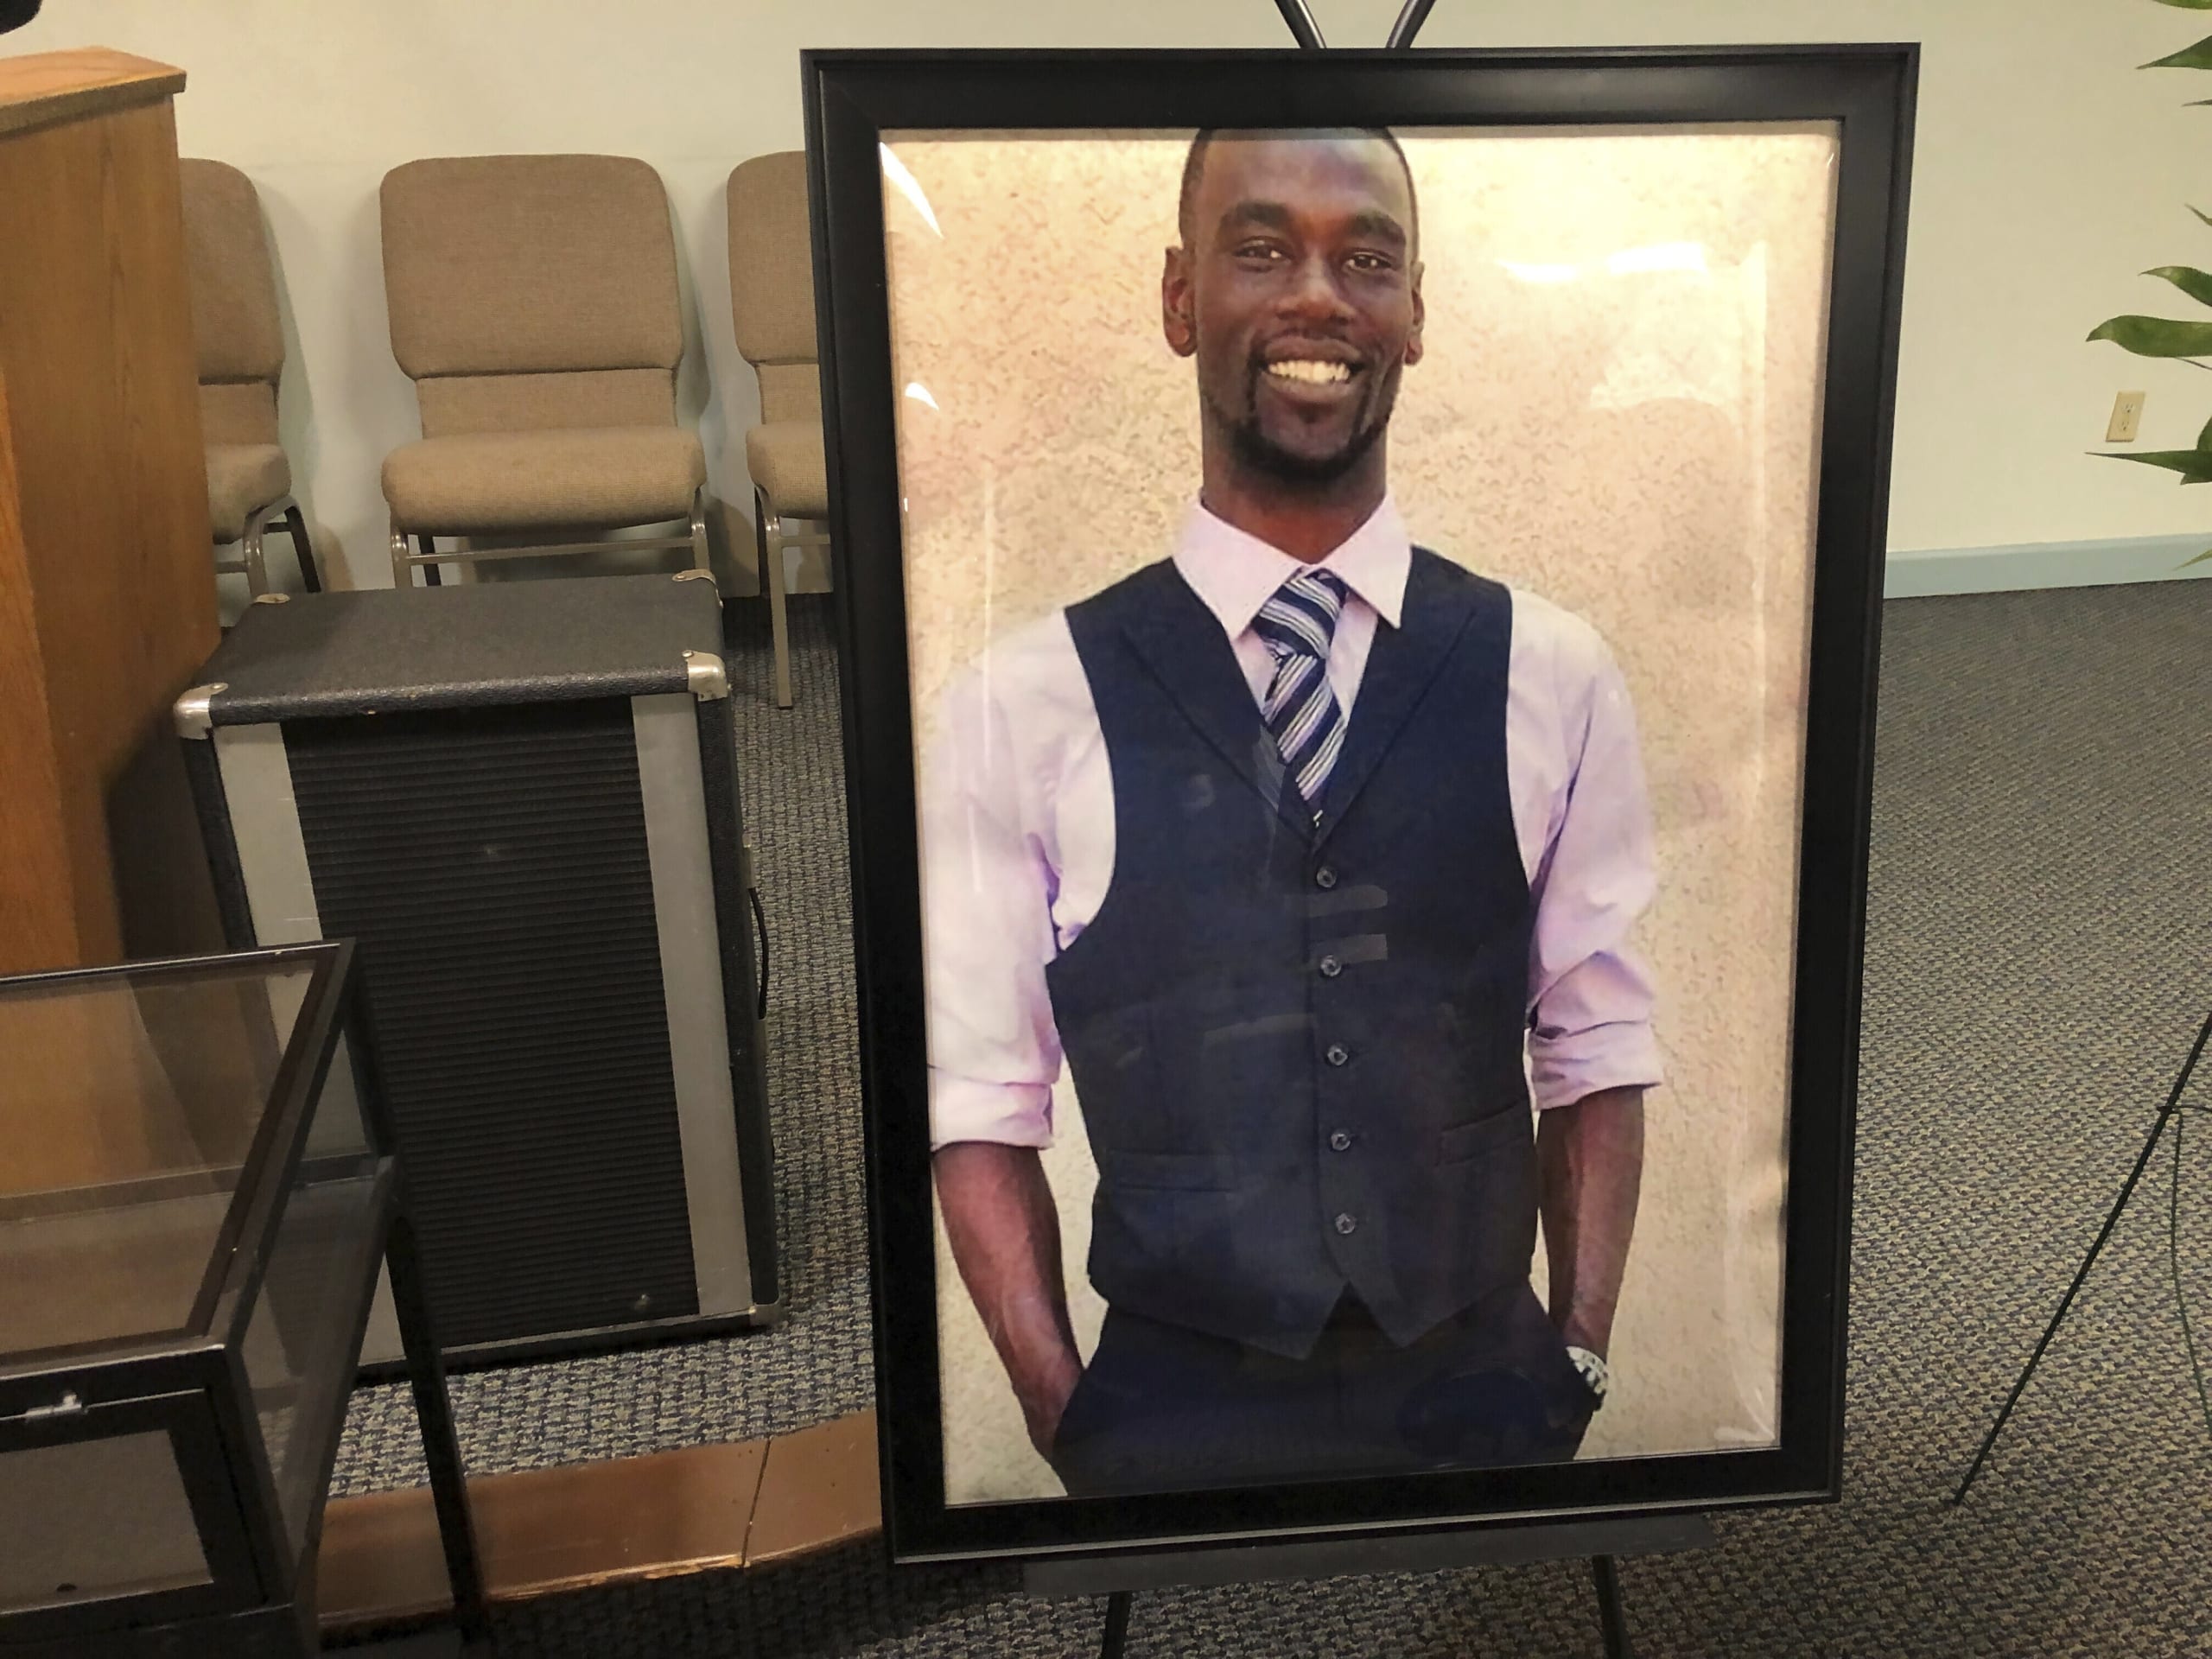 Federal investigation of Tyre Nichols death may take time, US attorney says